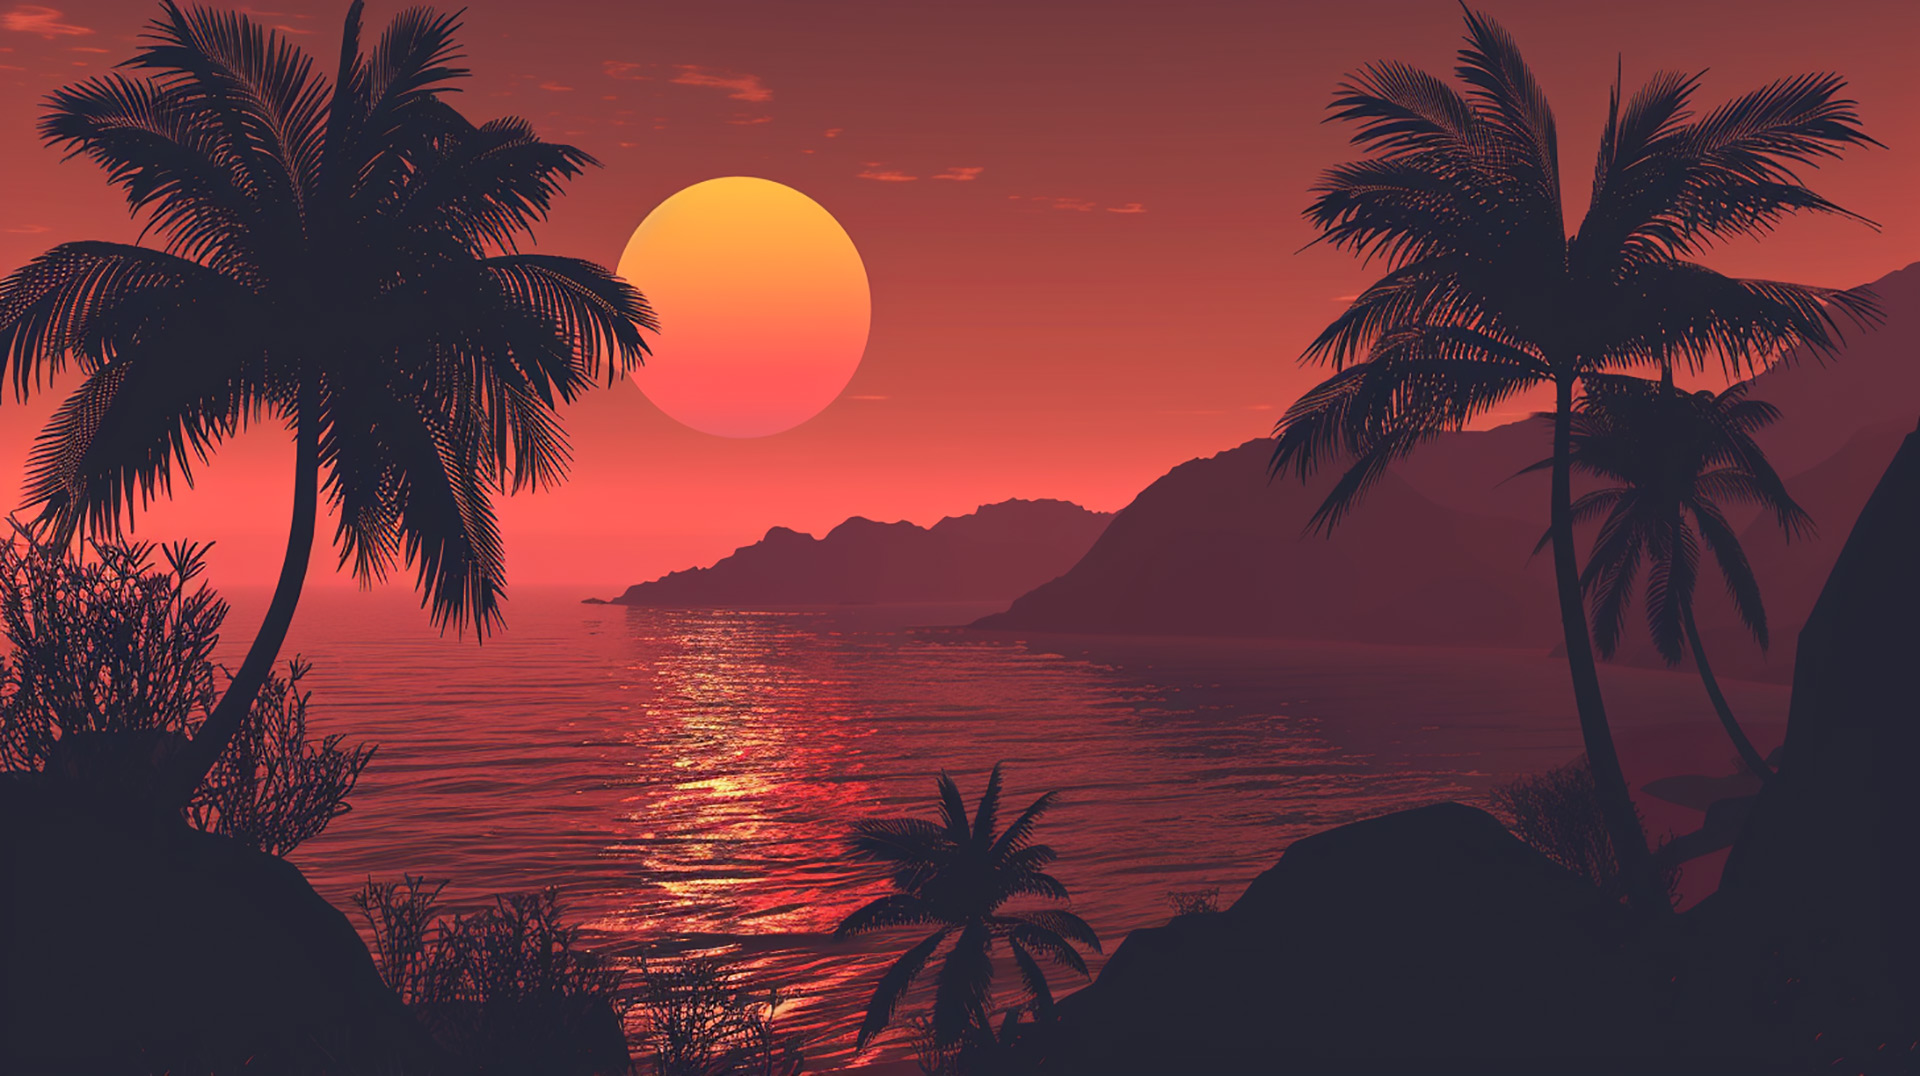 Sunset Bliss: Tropical Beach Tranquility